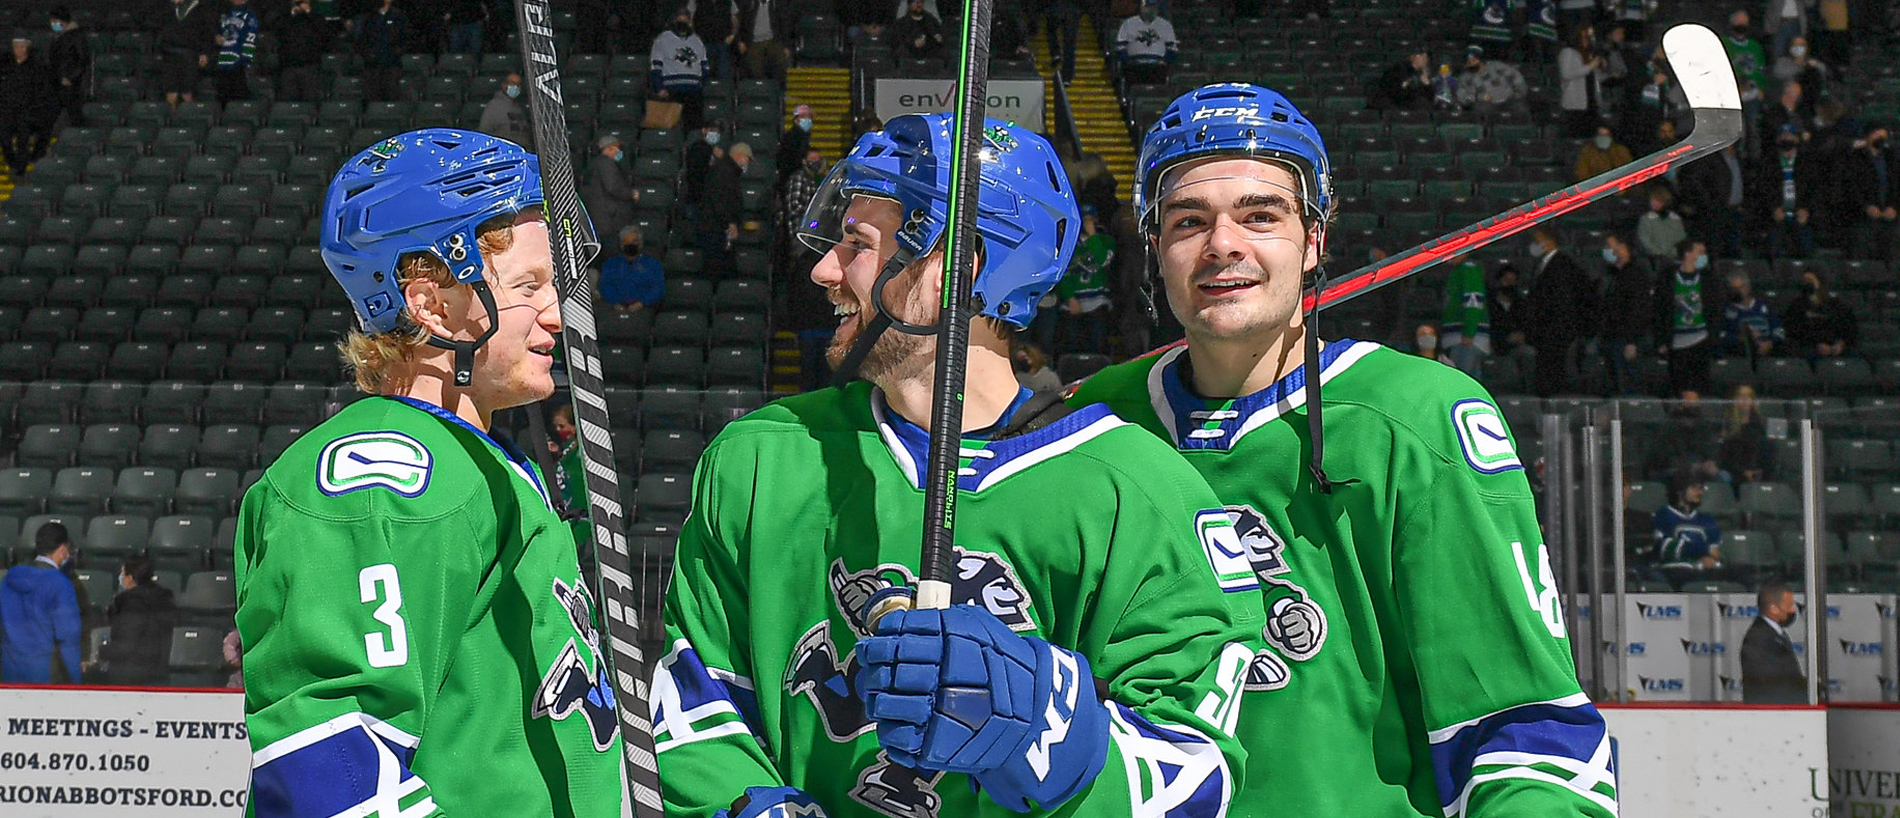 Canucks: AHL affiliate is officially relocating to Abbotsford next